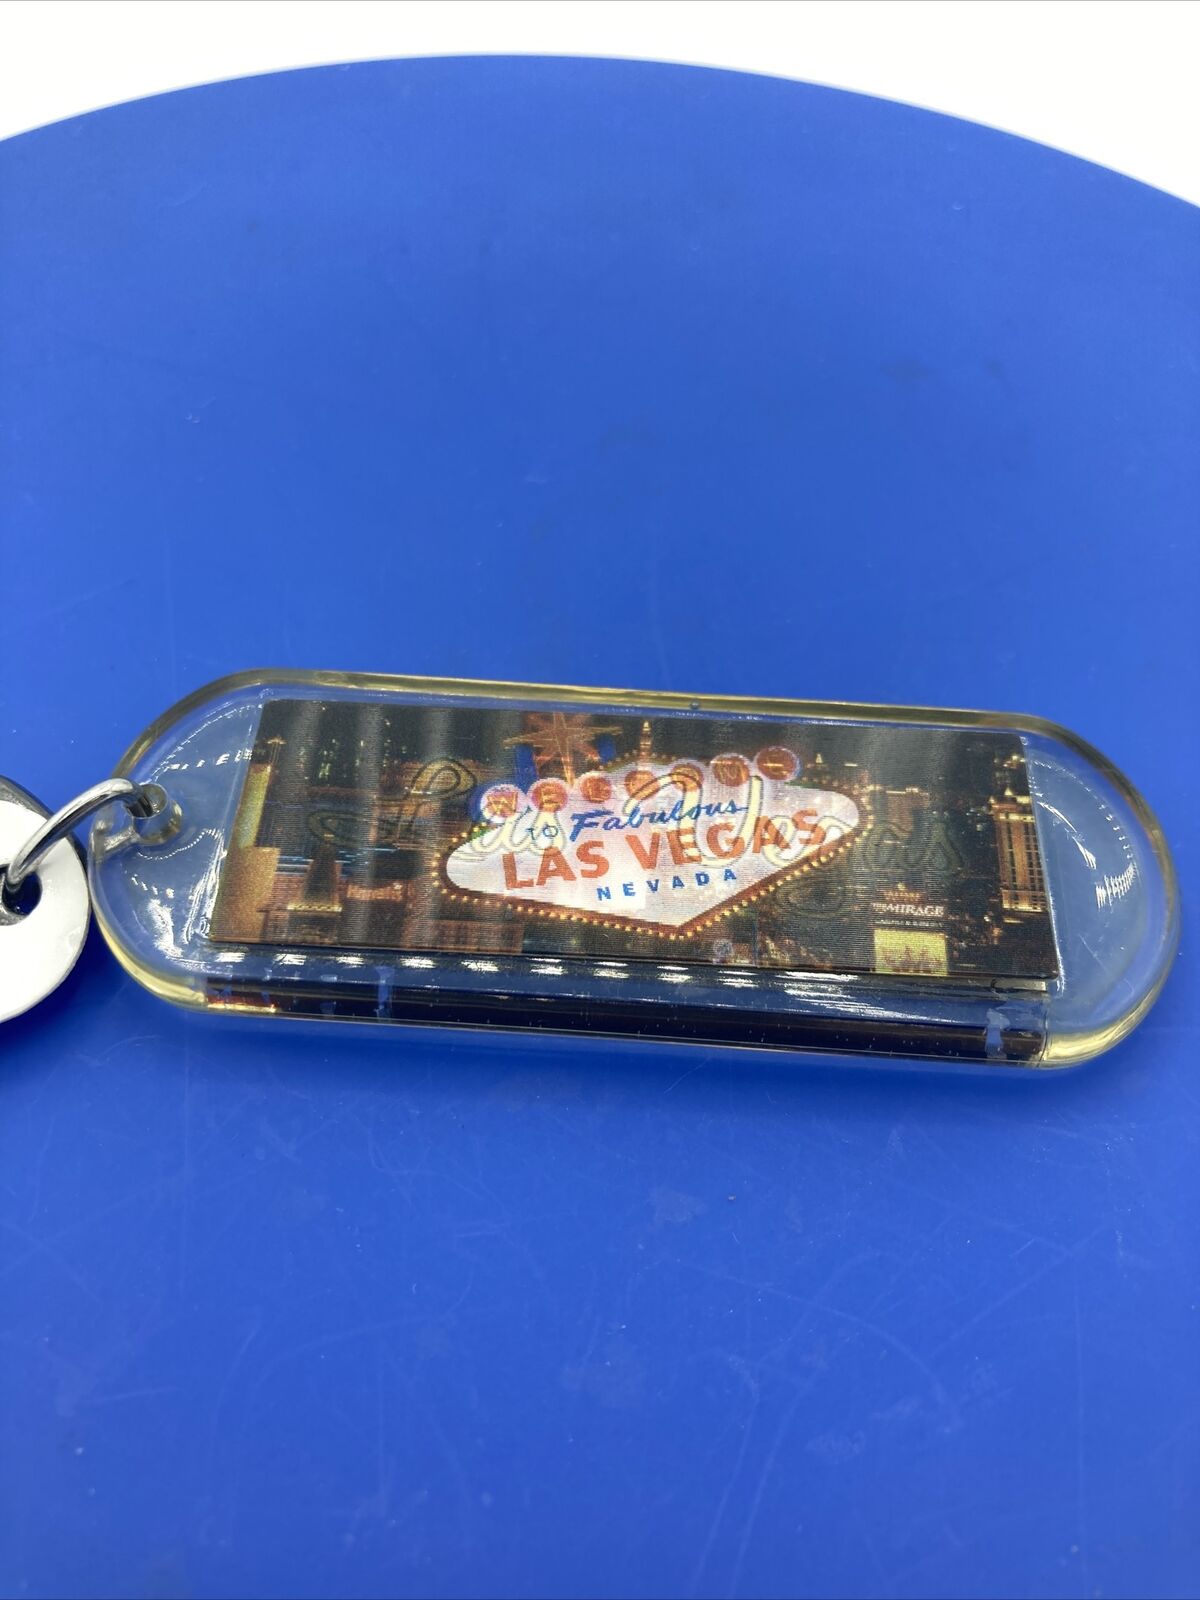 Lasergifts Key Chain Welcome To Las Vegas I Loved Cats Picture Changing Blinking